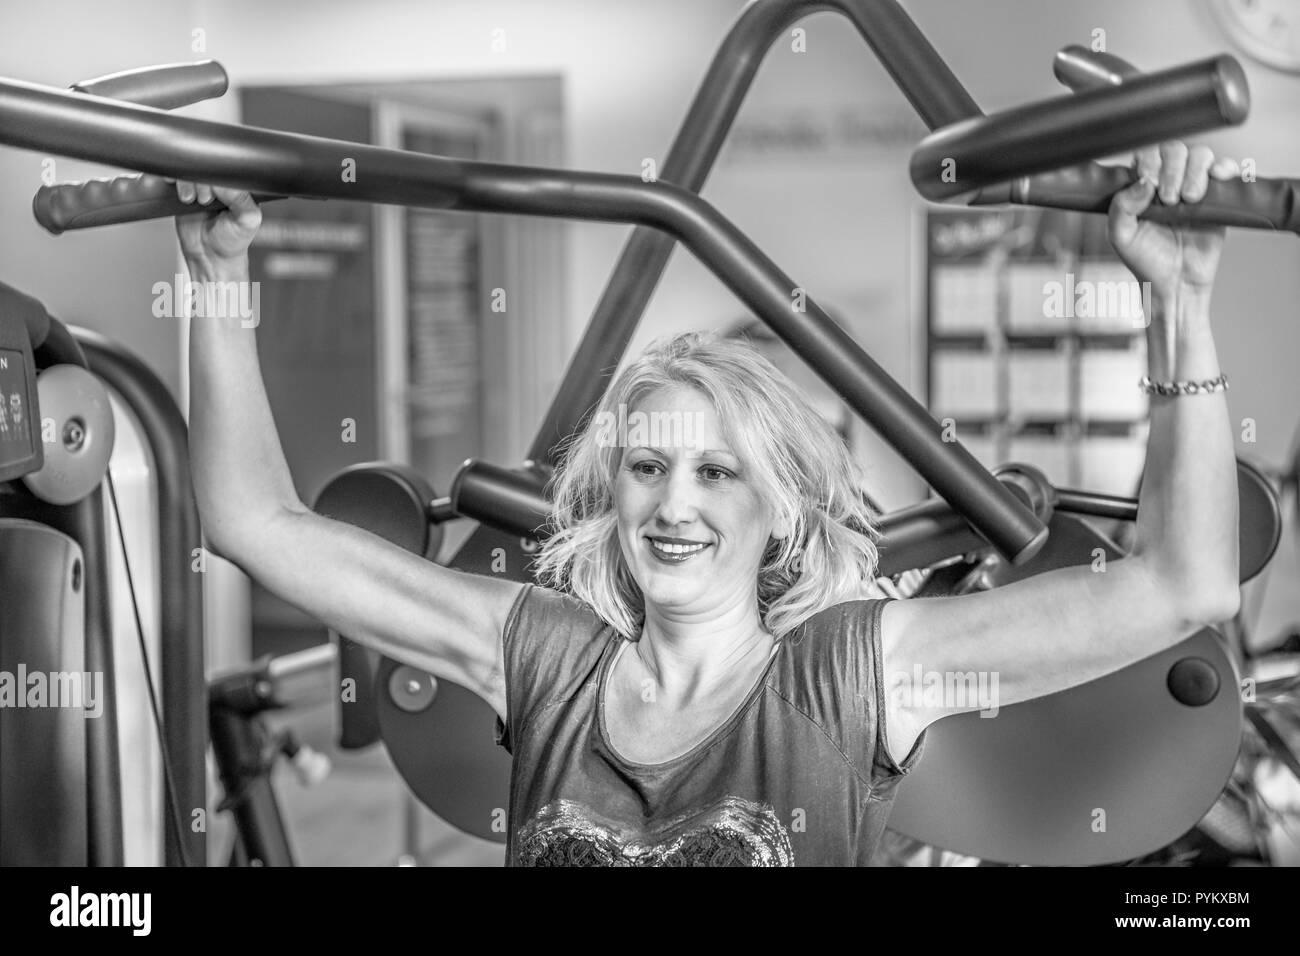 Portrait of smiling female athlete working on seated shoulder press machine. Training arms triceps biceps muscles in modern gym. Healthy lifestyle concept. Shot in black and white. Stock Photo